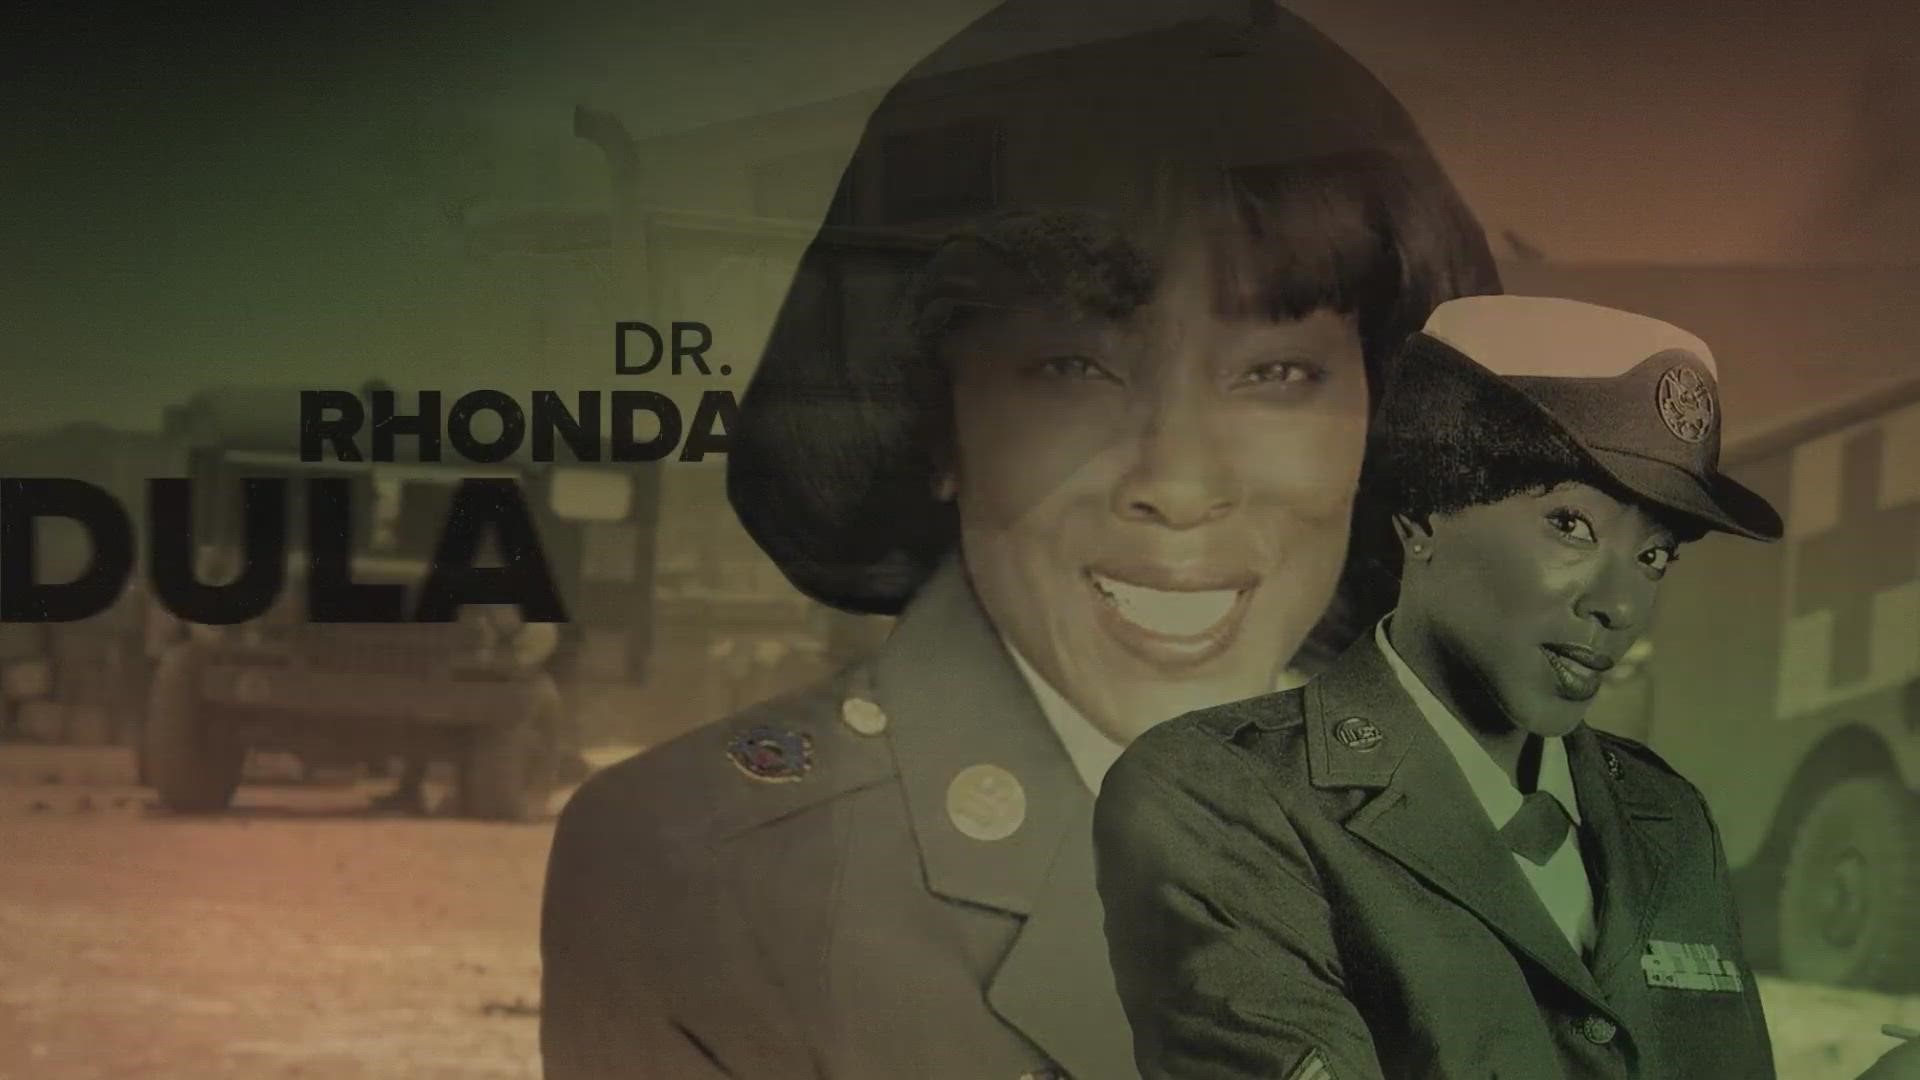 This is one of the women featured in The Invisible Project, a documentary on challenges facing women in the military.